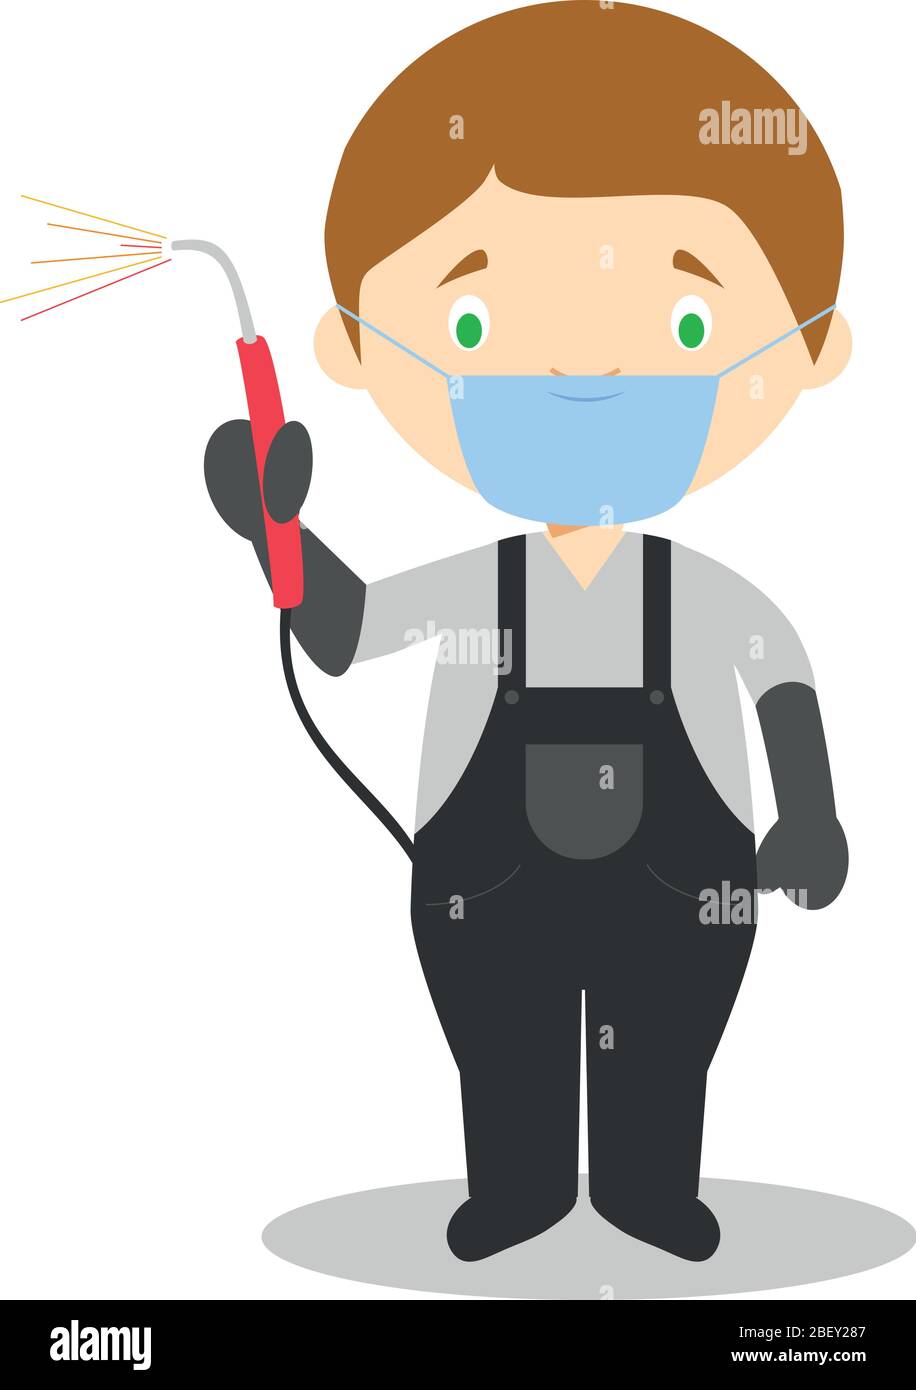 Cute cartoon vector illustration of a welder with surgical mask and latex gloves as protection against a health emergency Stock Vector